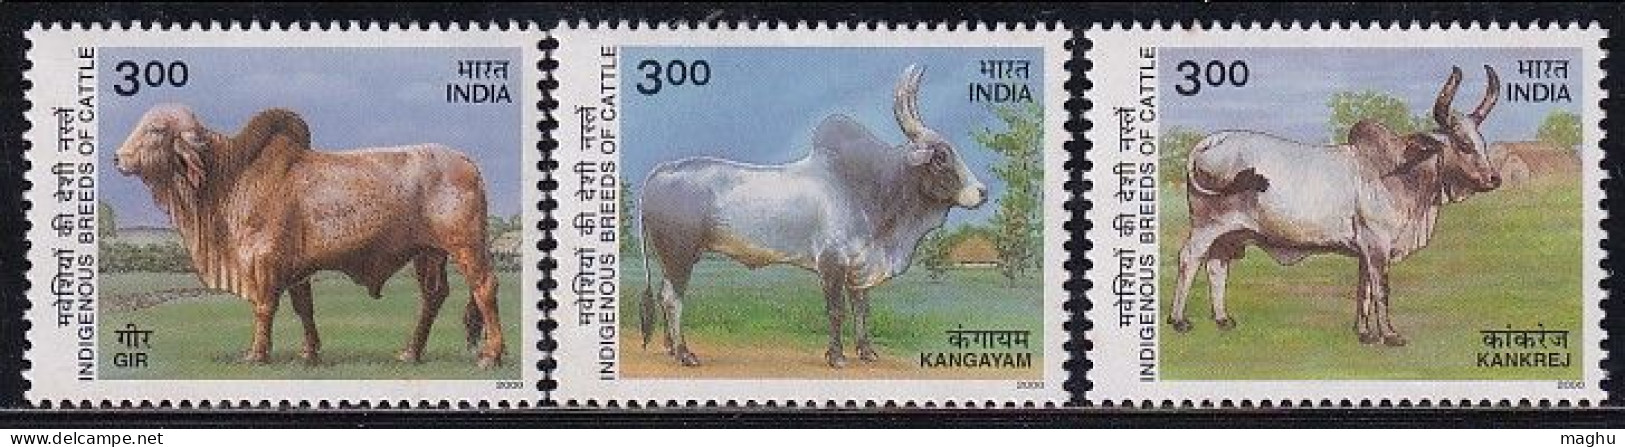 3 Diff., Breeds Of Cattle, India MNH 2000,, Farm Animal, Cow, Cond., Margnal Stains - Nuovi